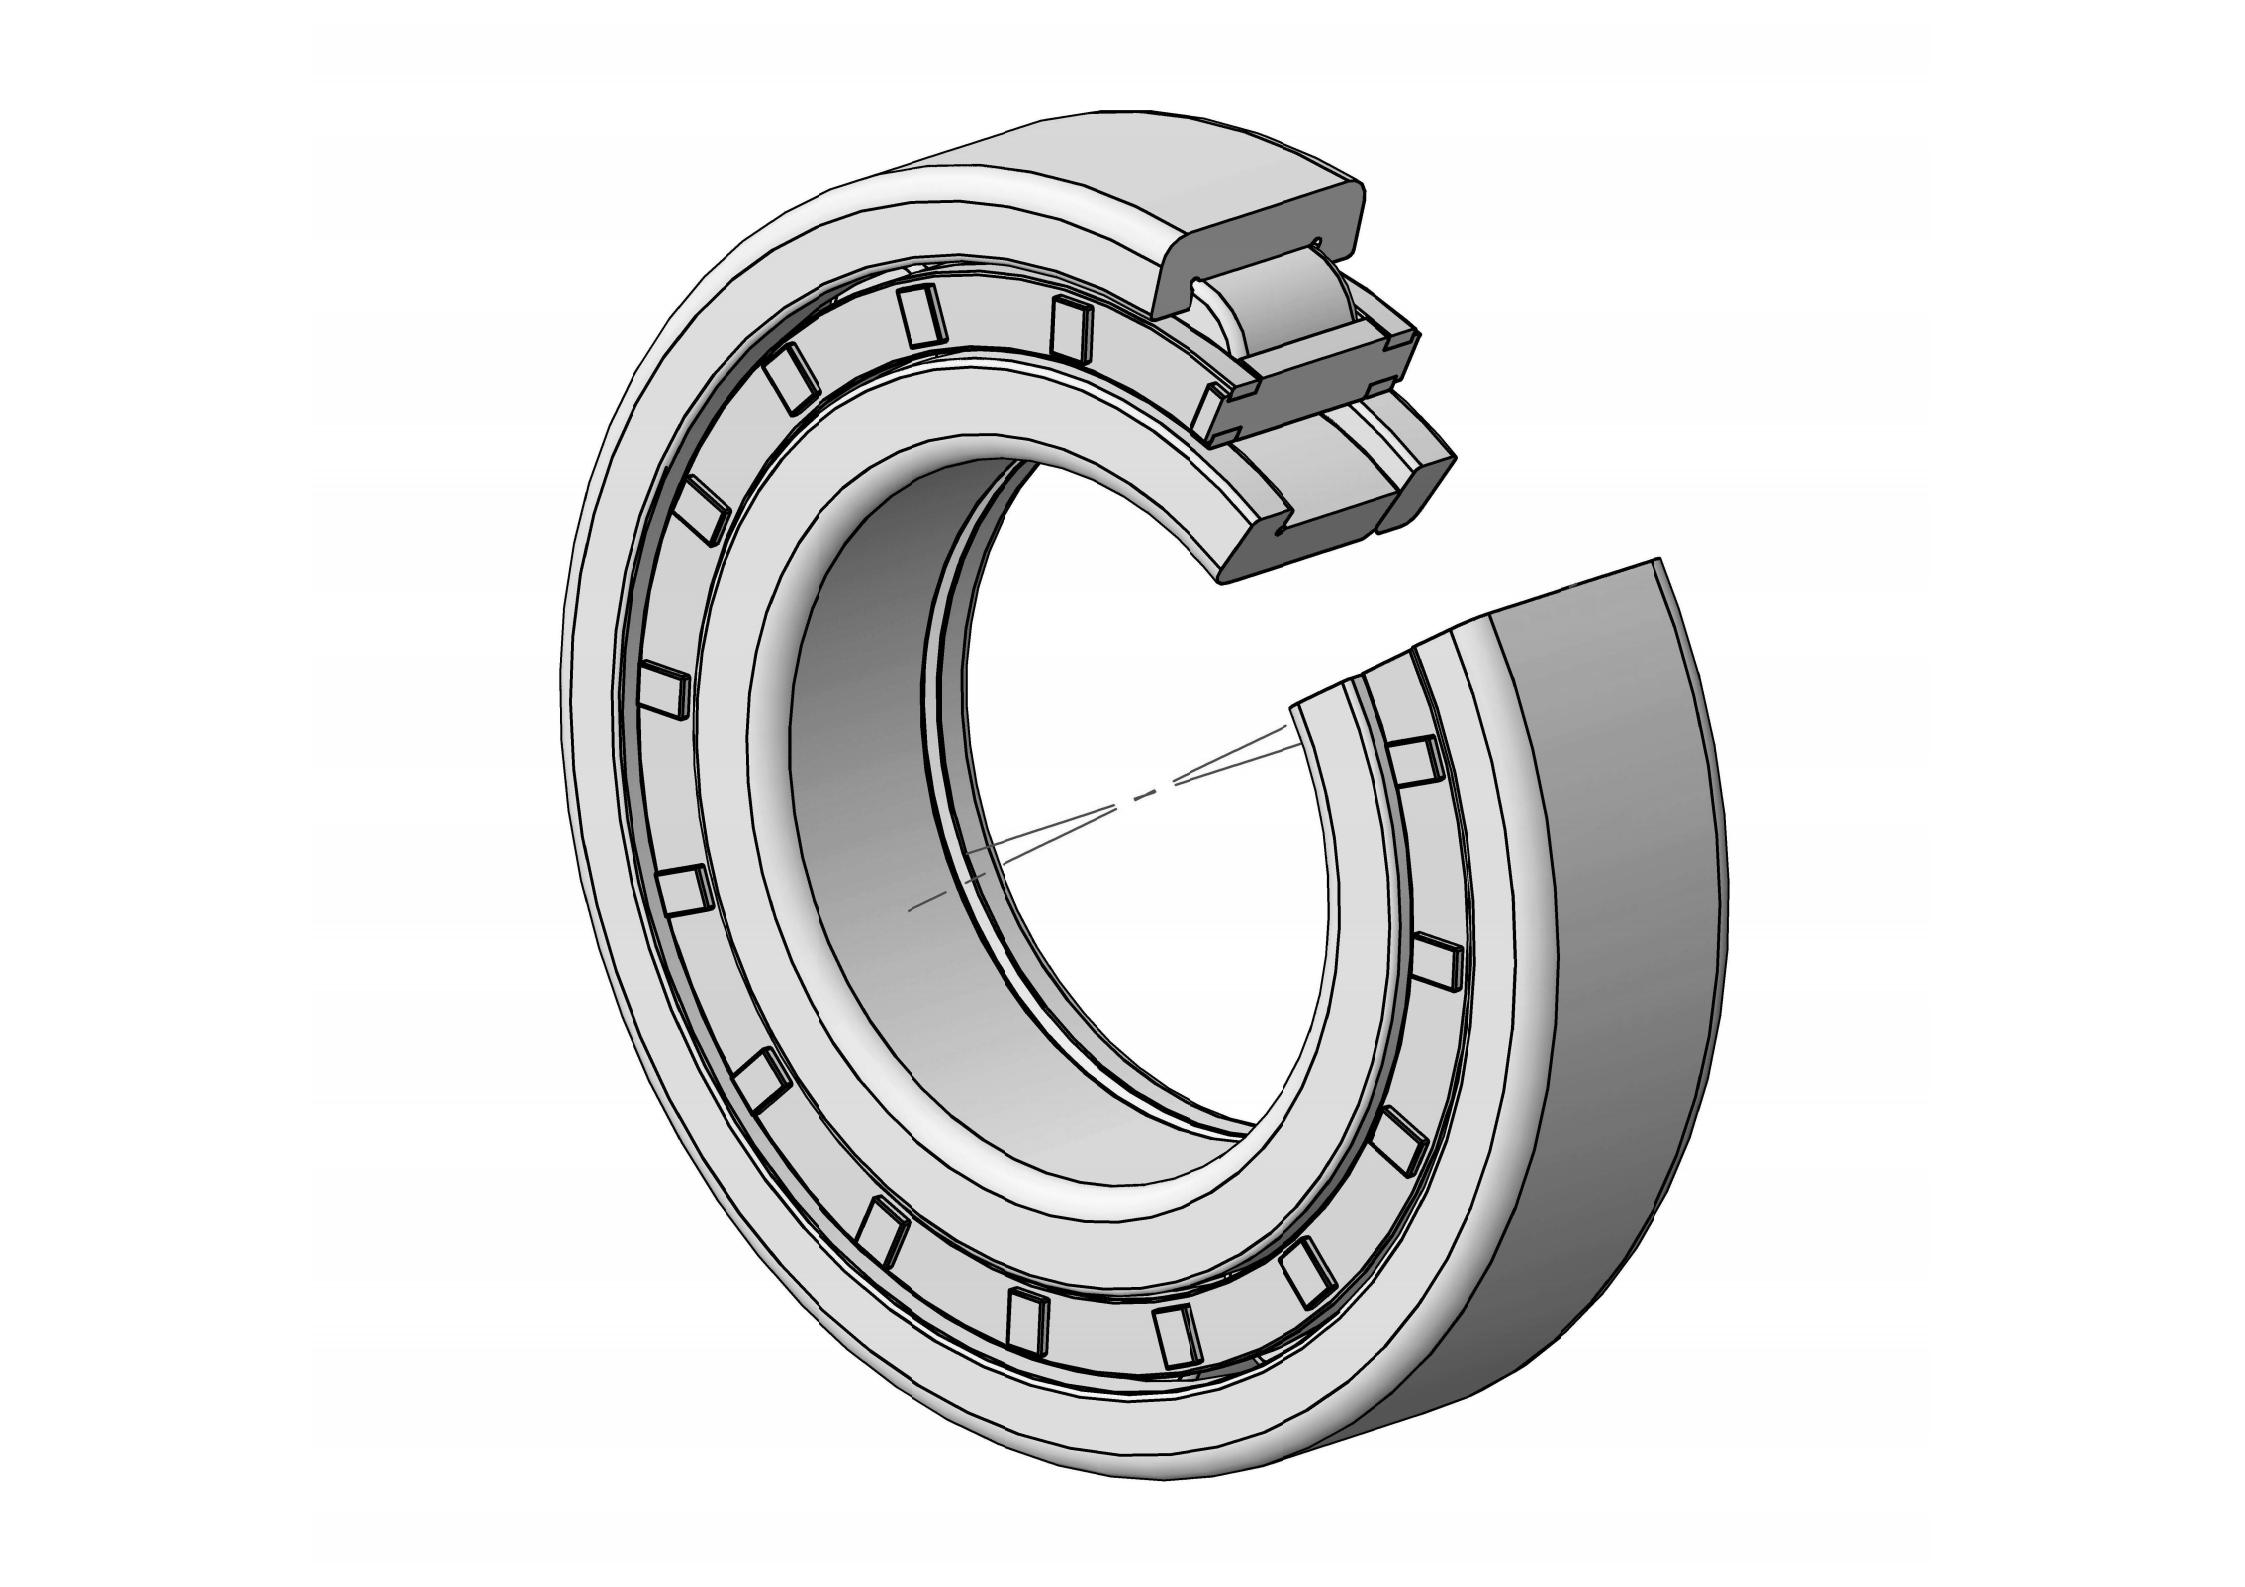 NUP232-EM Single Row Cylindrical roller bearing 